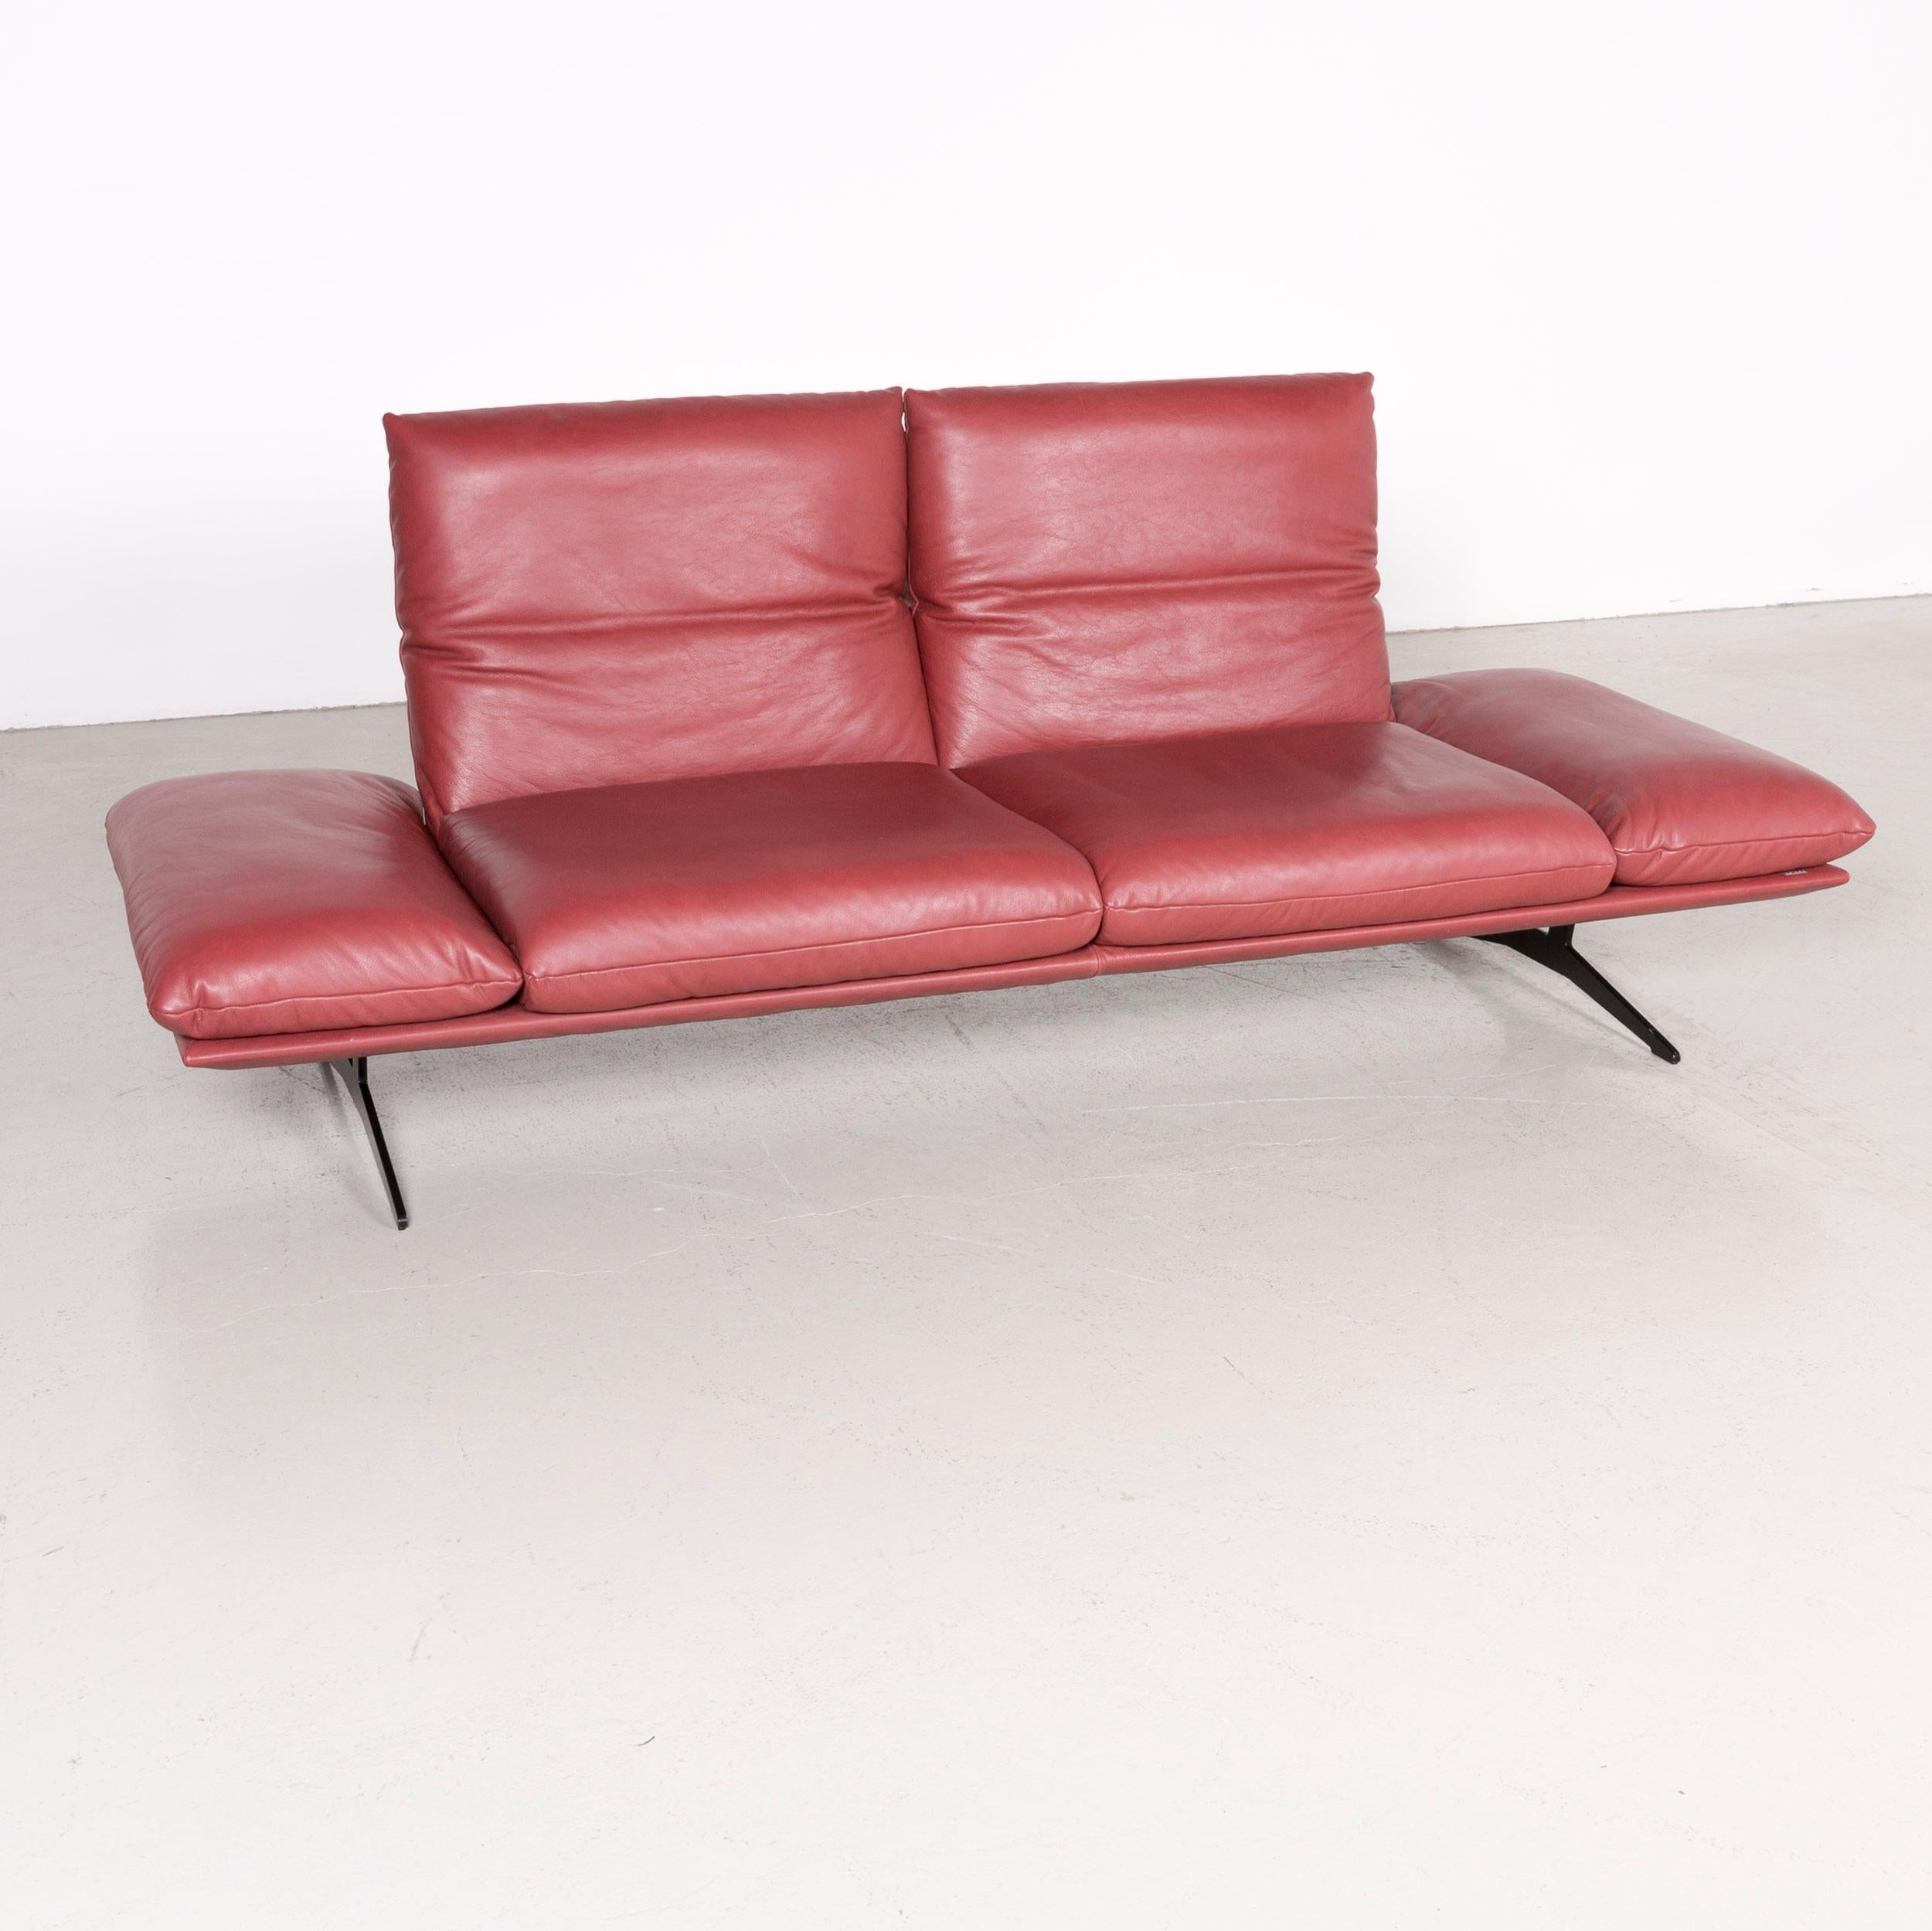 Koinor Francis designer leather sofa red three-seat couch.